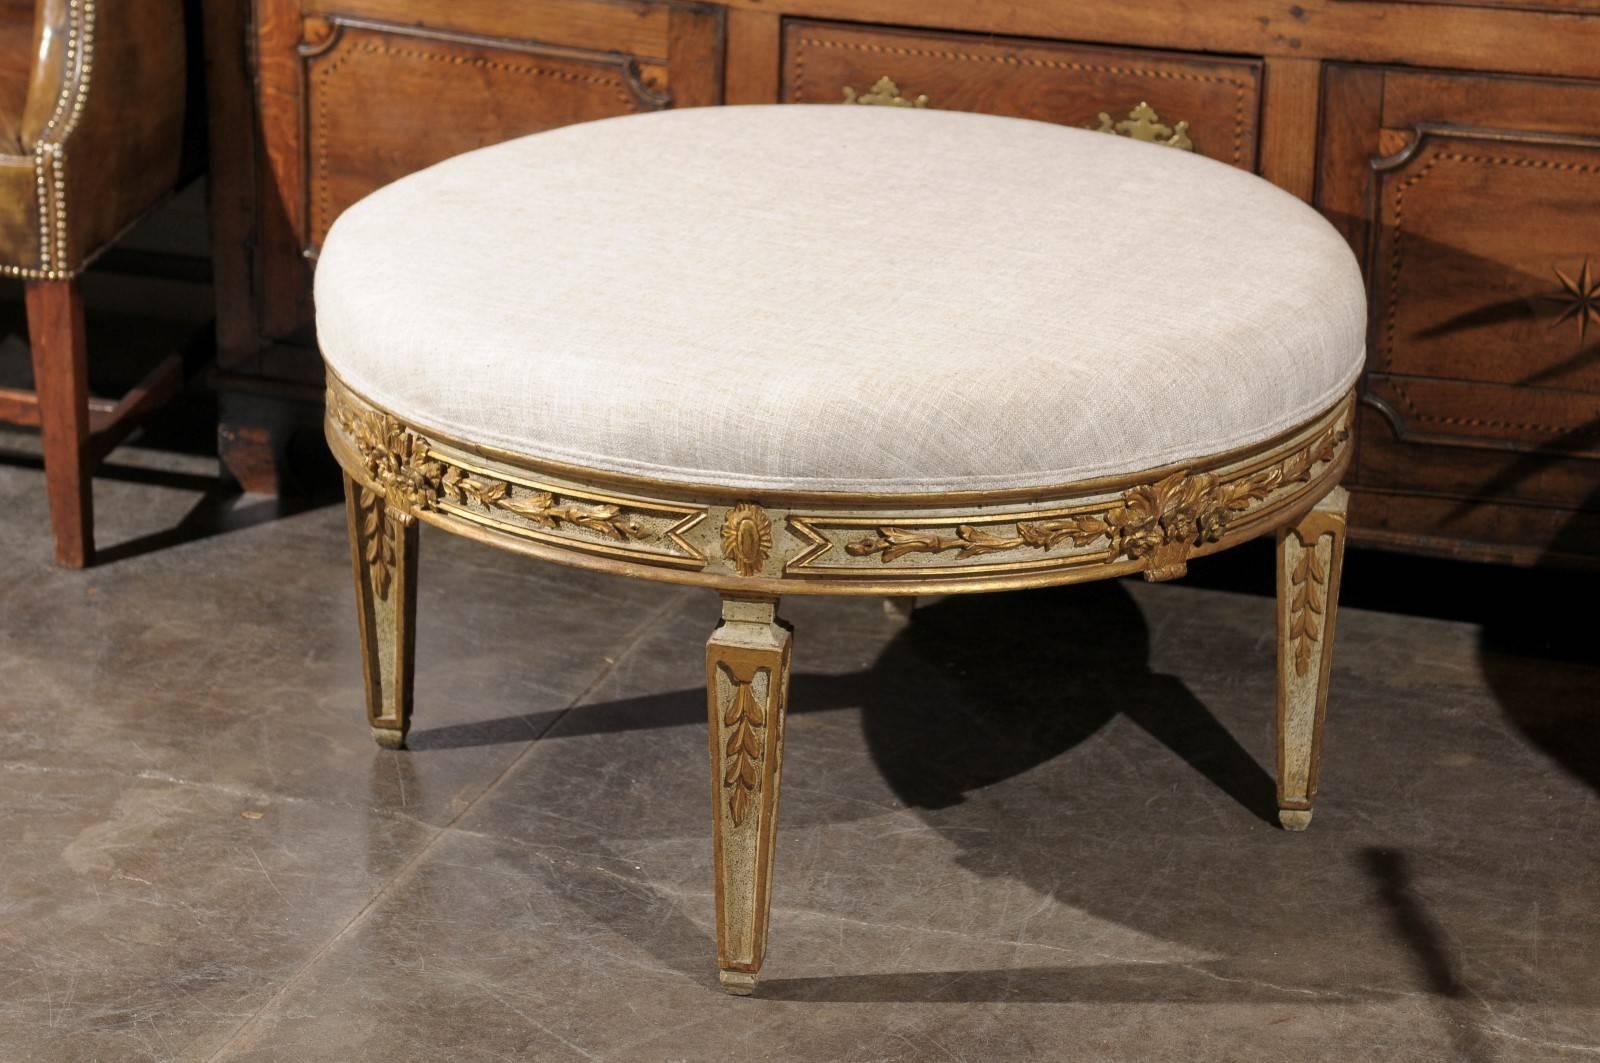 20th Century Italian Neoclassical Style Upholstered Round Ottoman with Giltwood Motifs